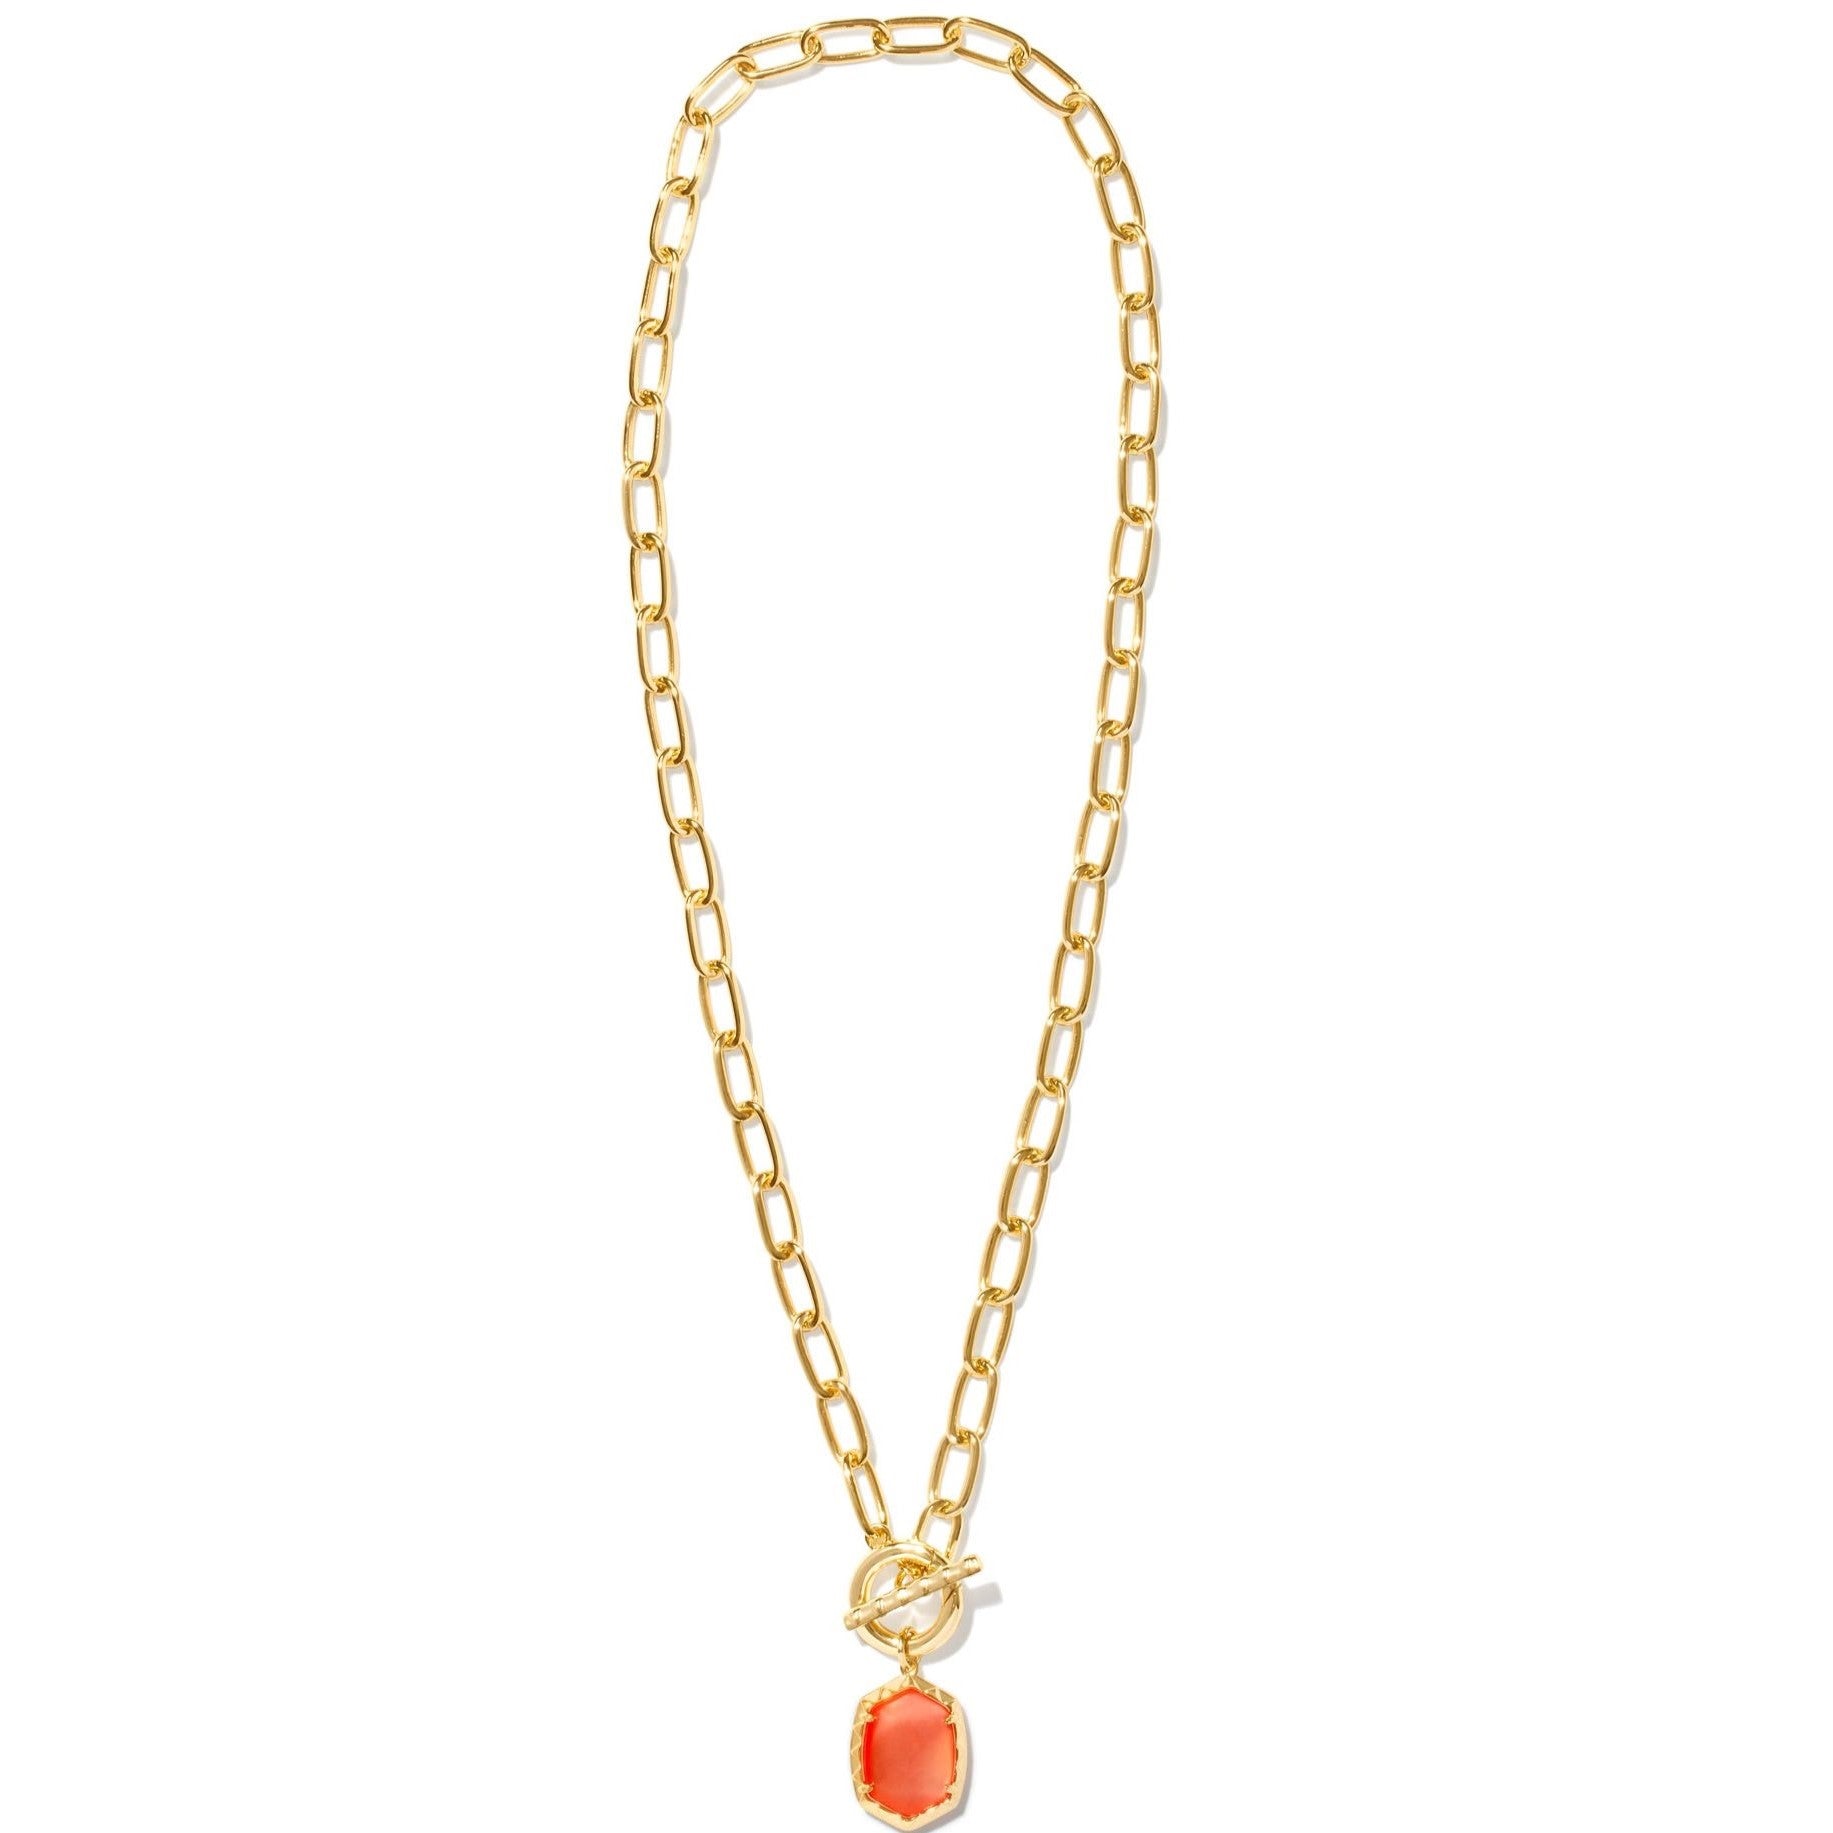 Kendra Scott | Daphne Gold Link and Chain Necklace in Coral Pink Mother of Pearl - Giddy Up Glamour Boutique